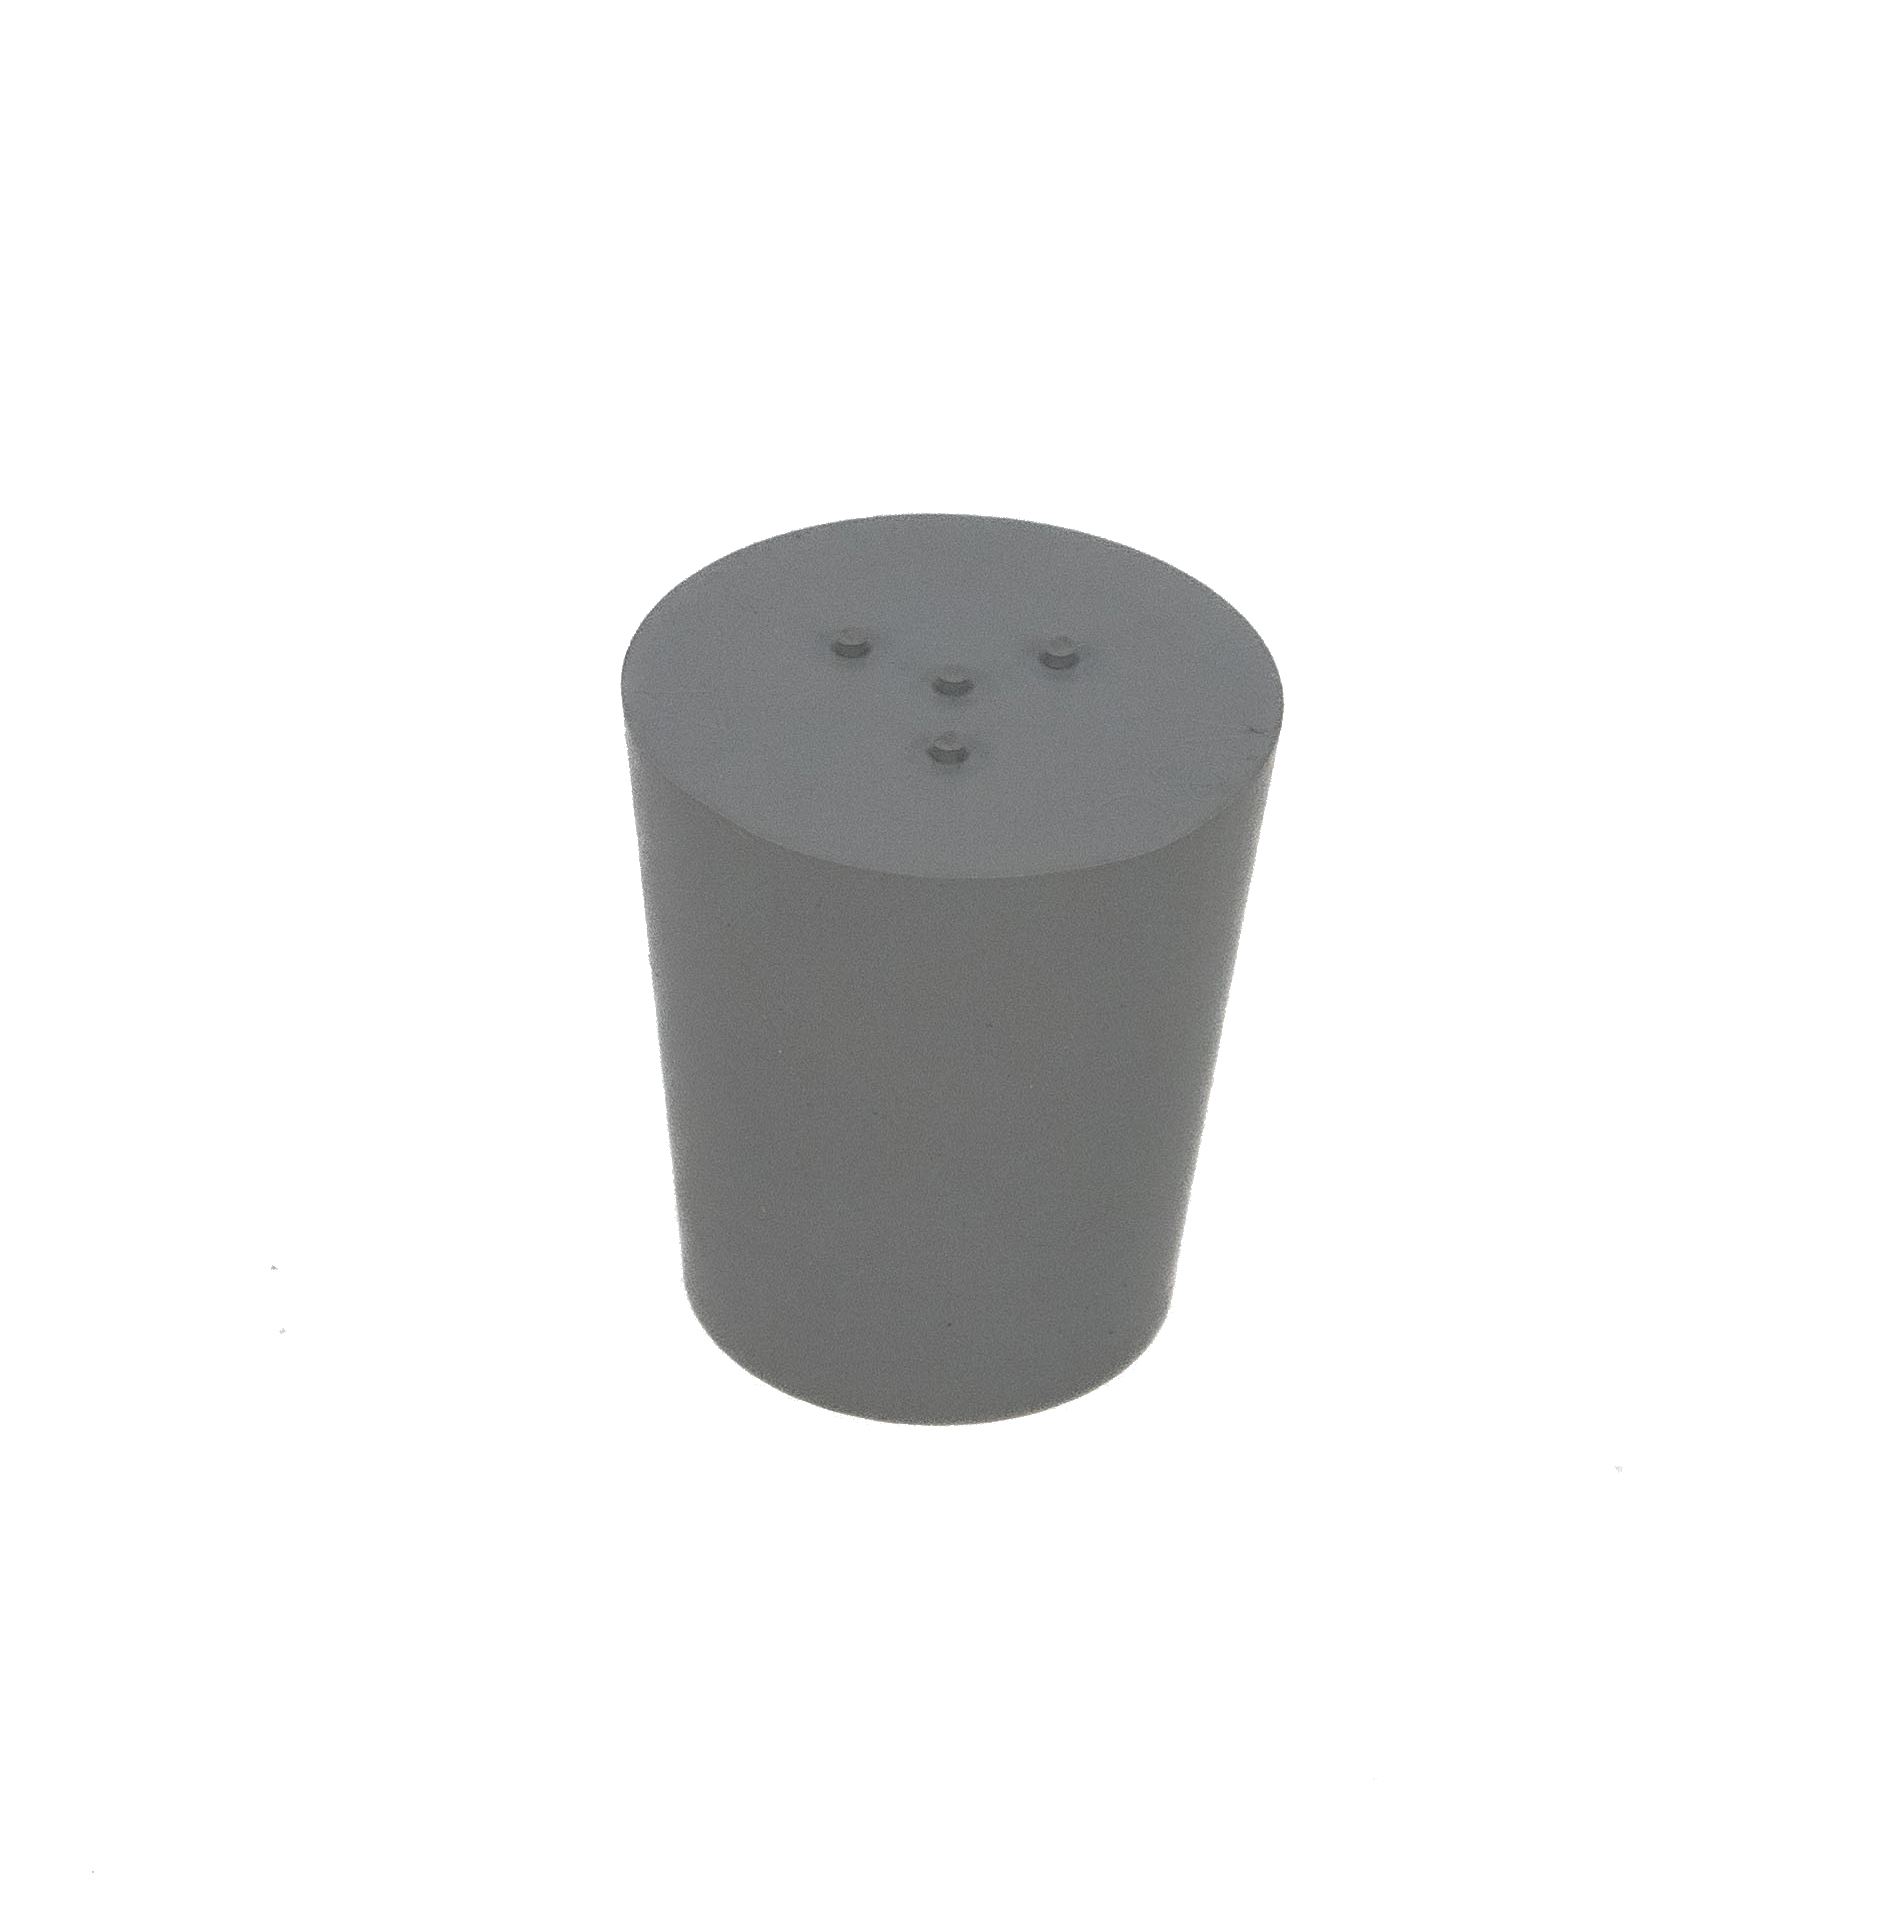 Rubber stopper grey 21 x 27 mm without hole